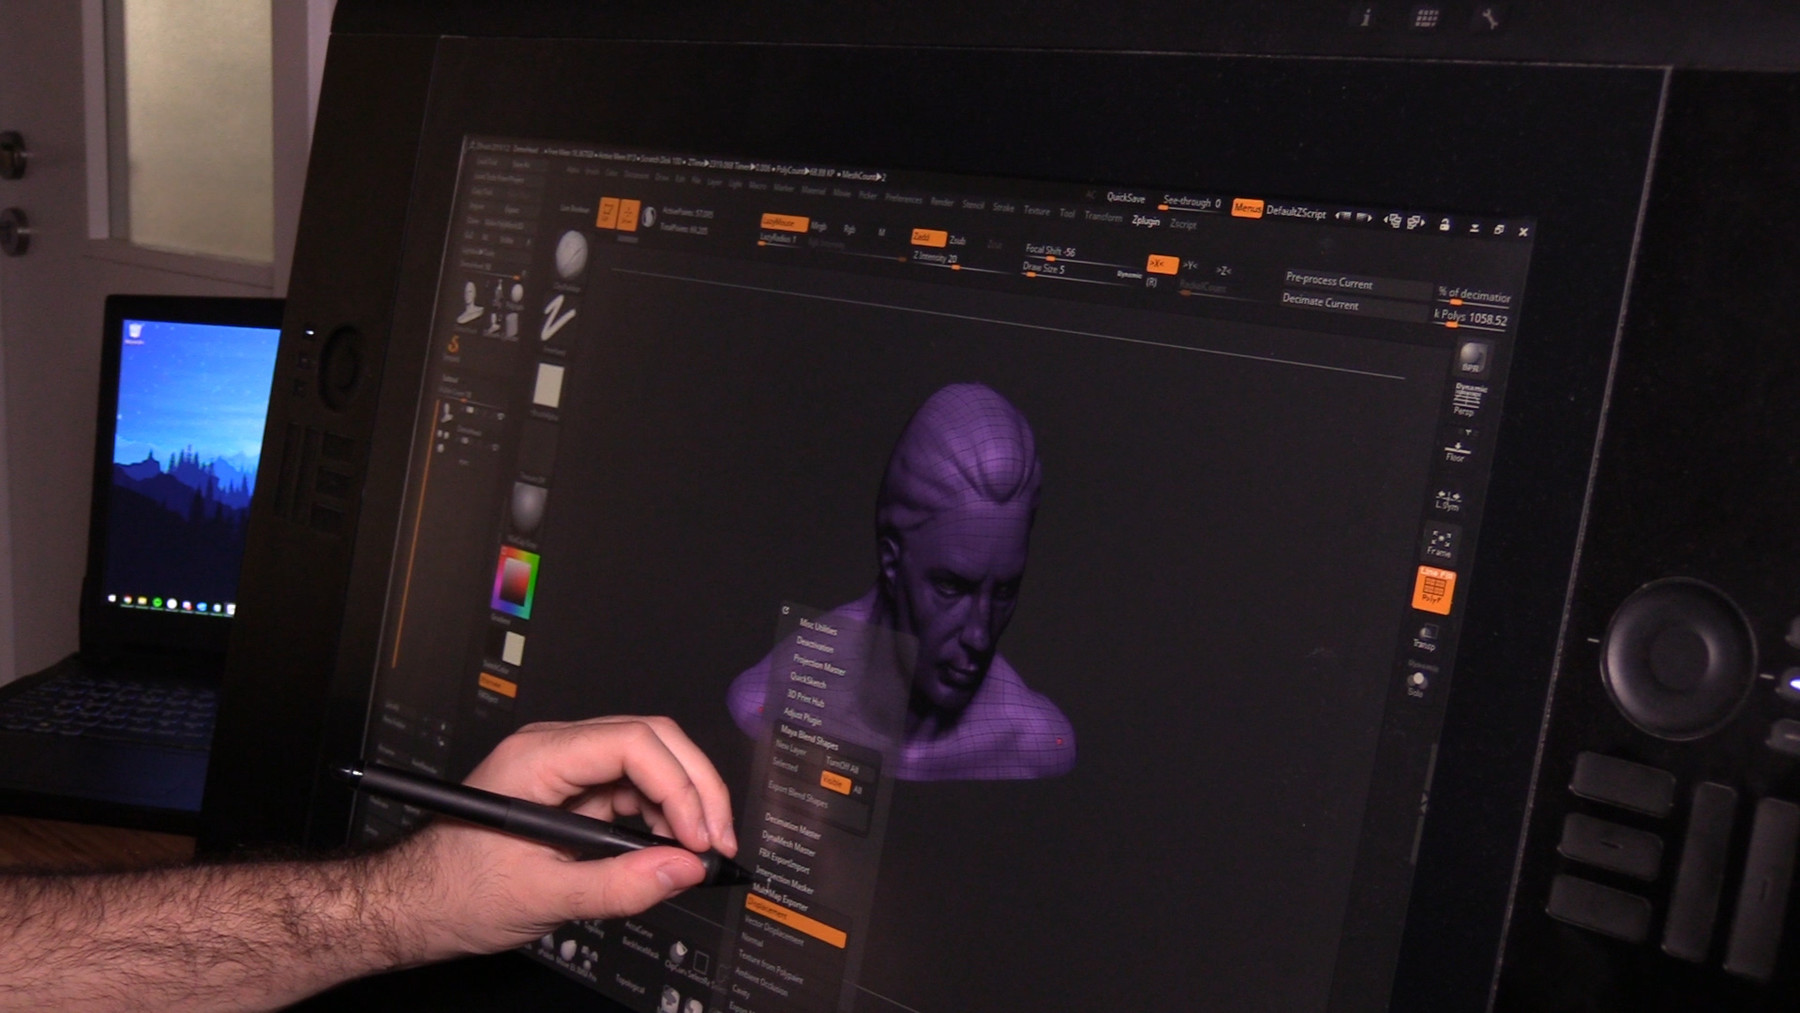 how to speed up workflows zbrush